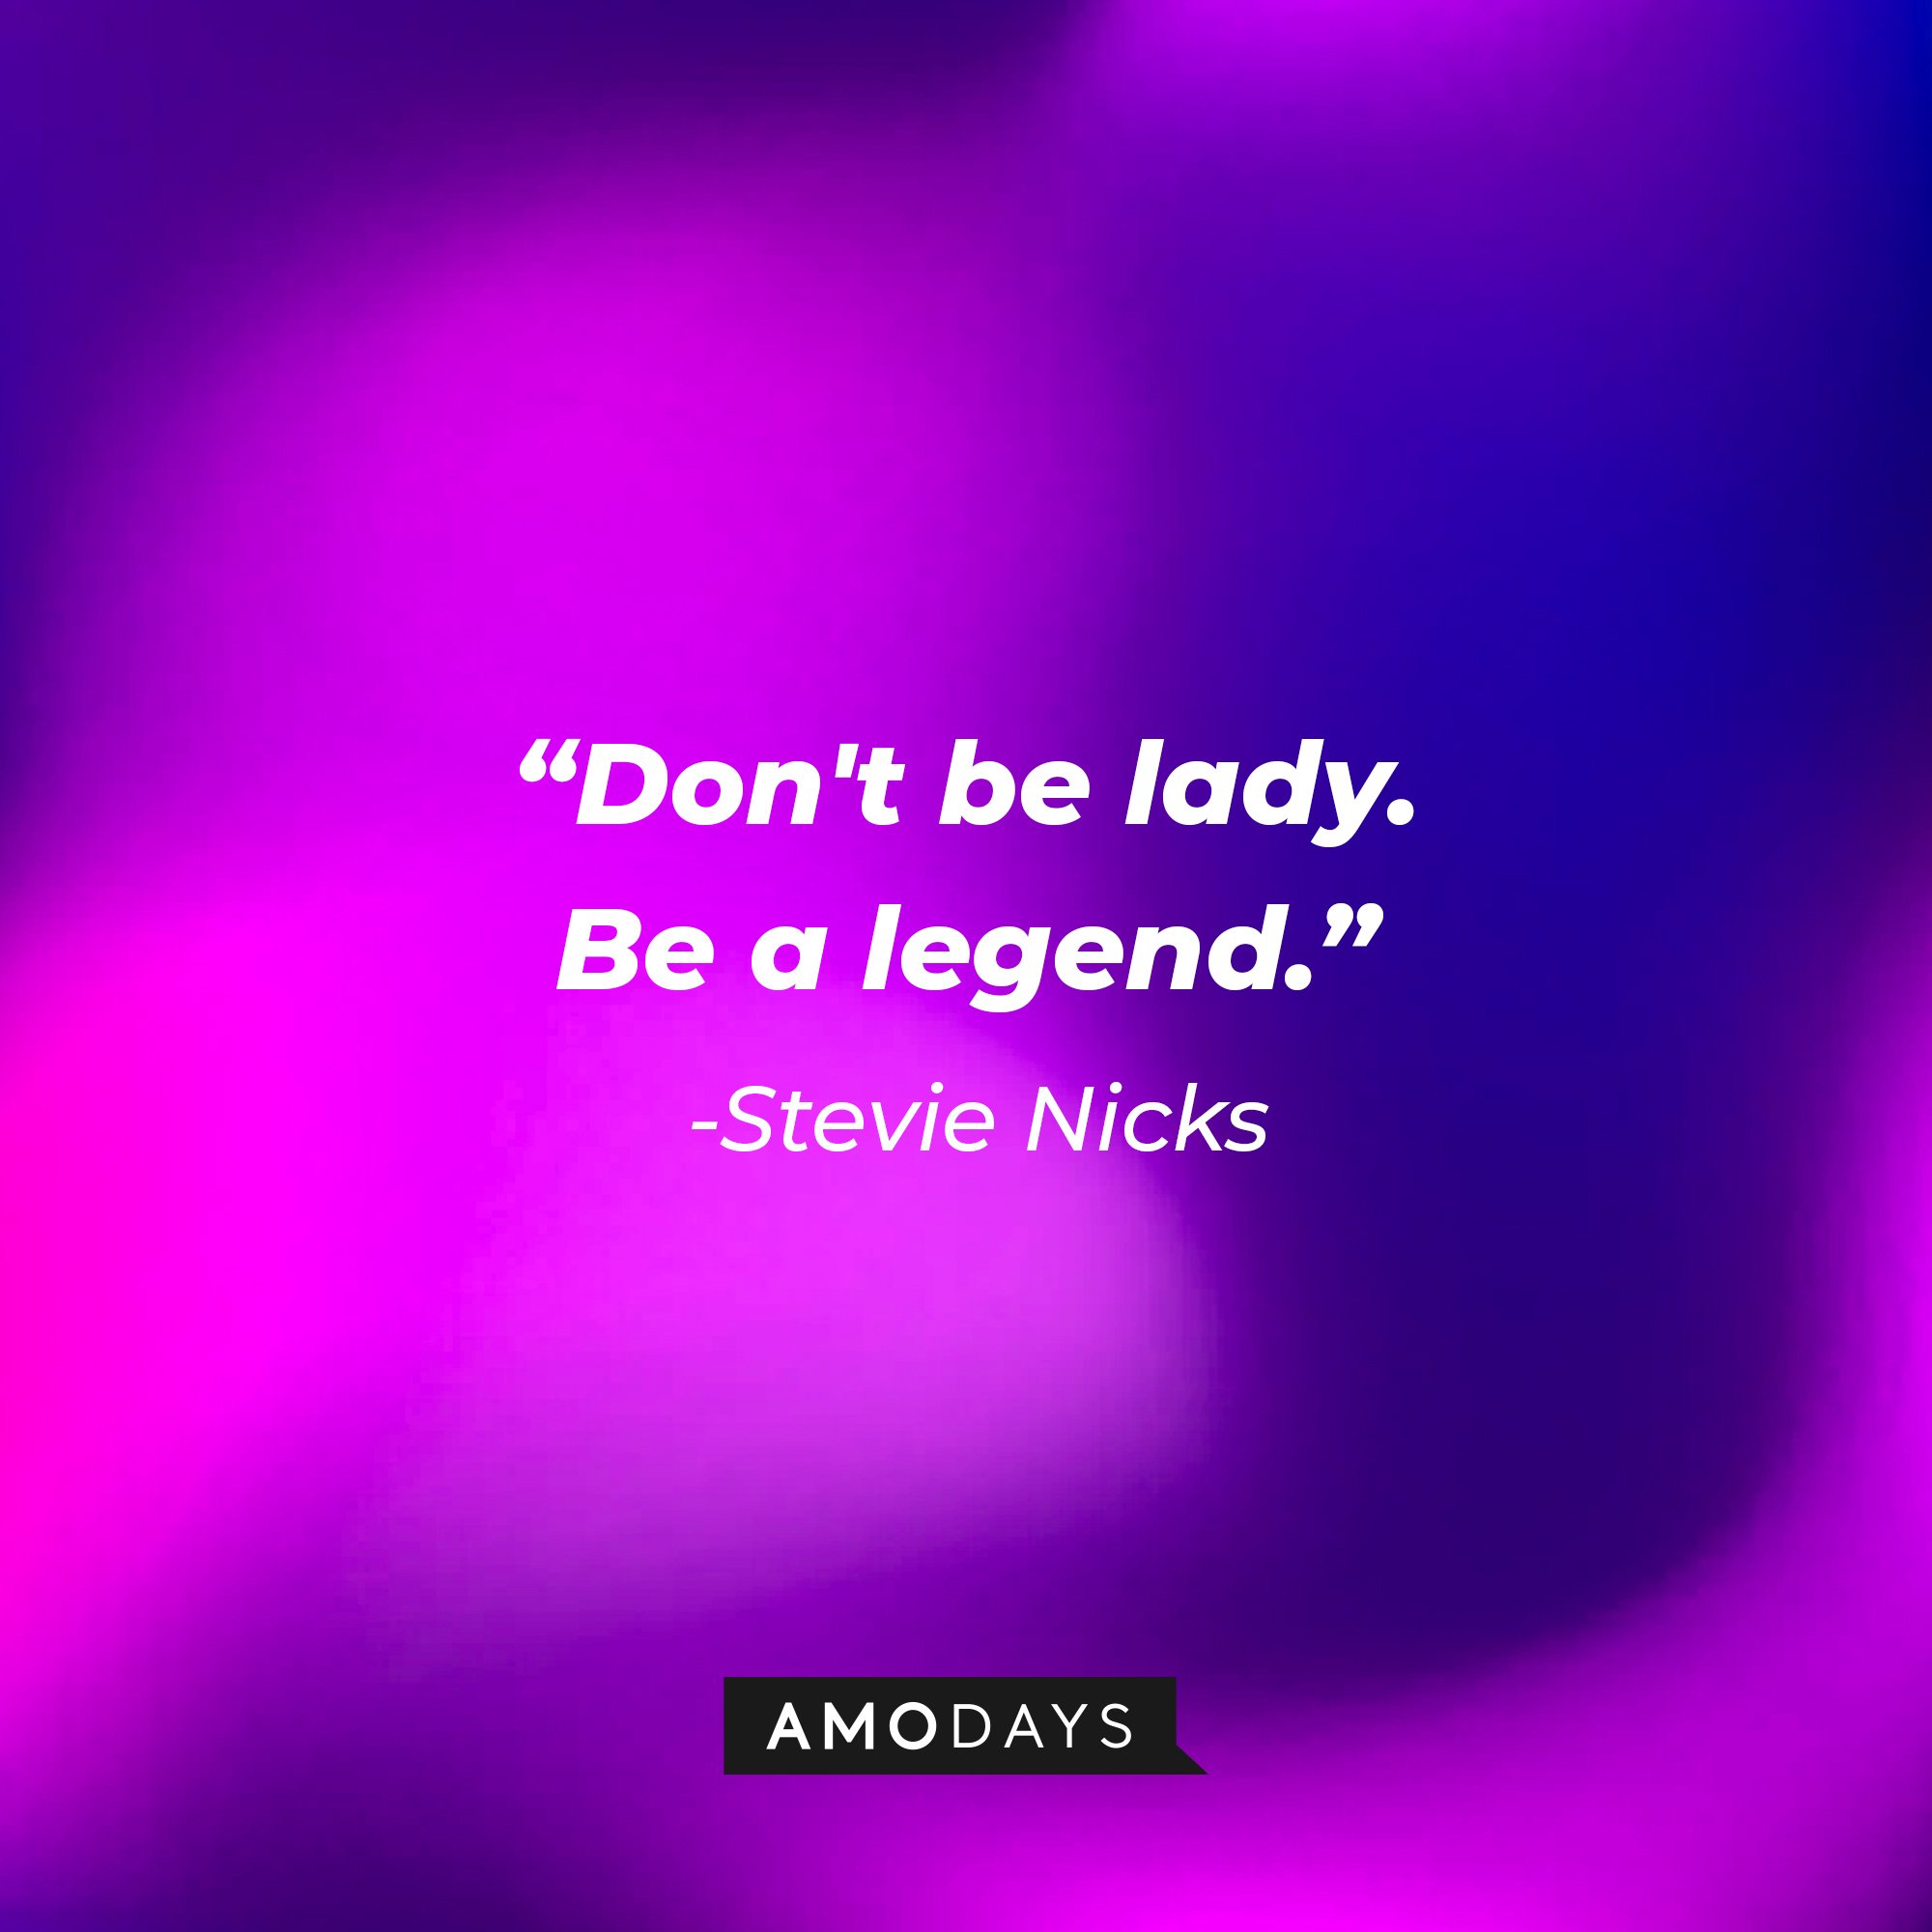 Stevie Nick's quote: "Don't be lady. Be a legend." | Image: AmoDays